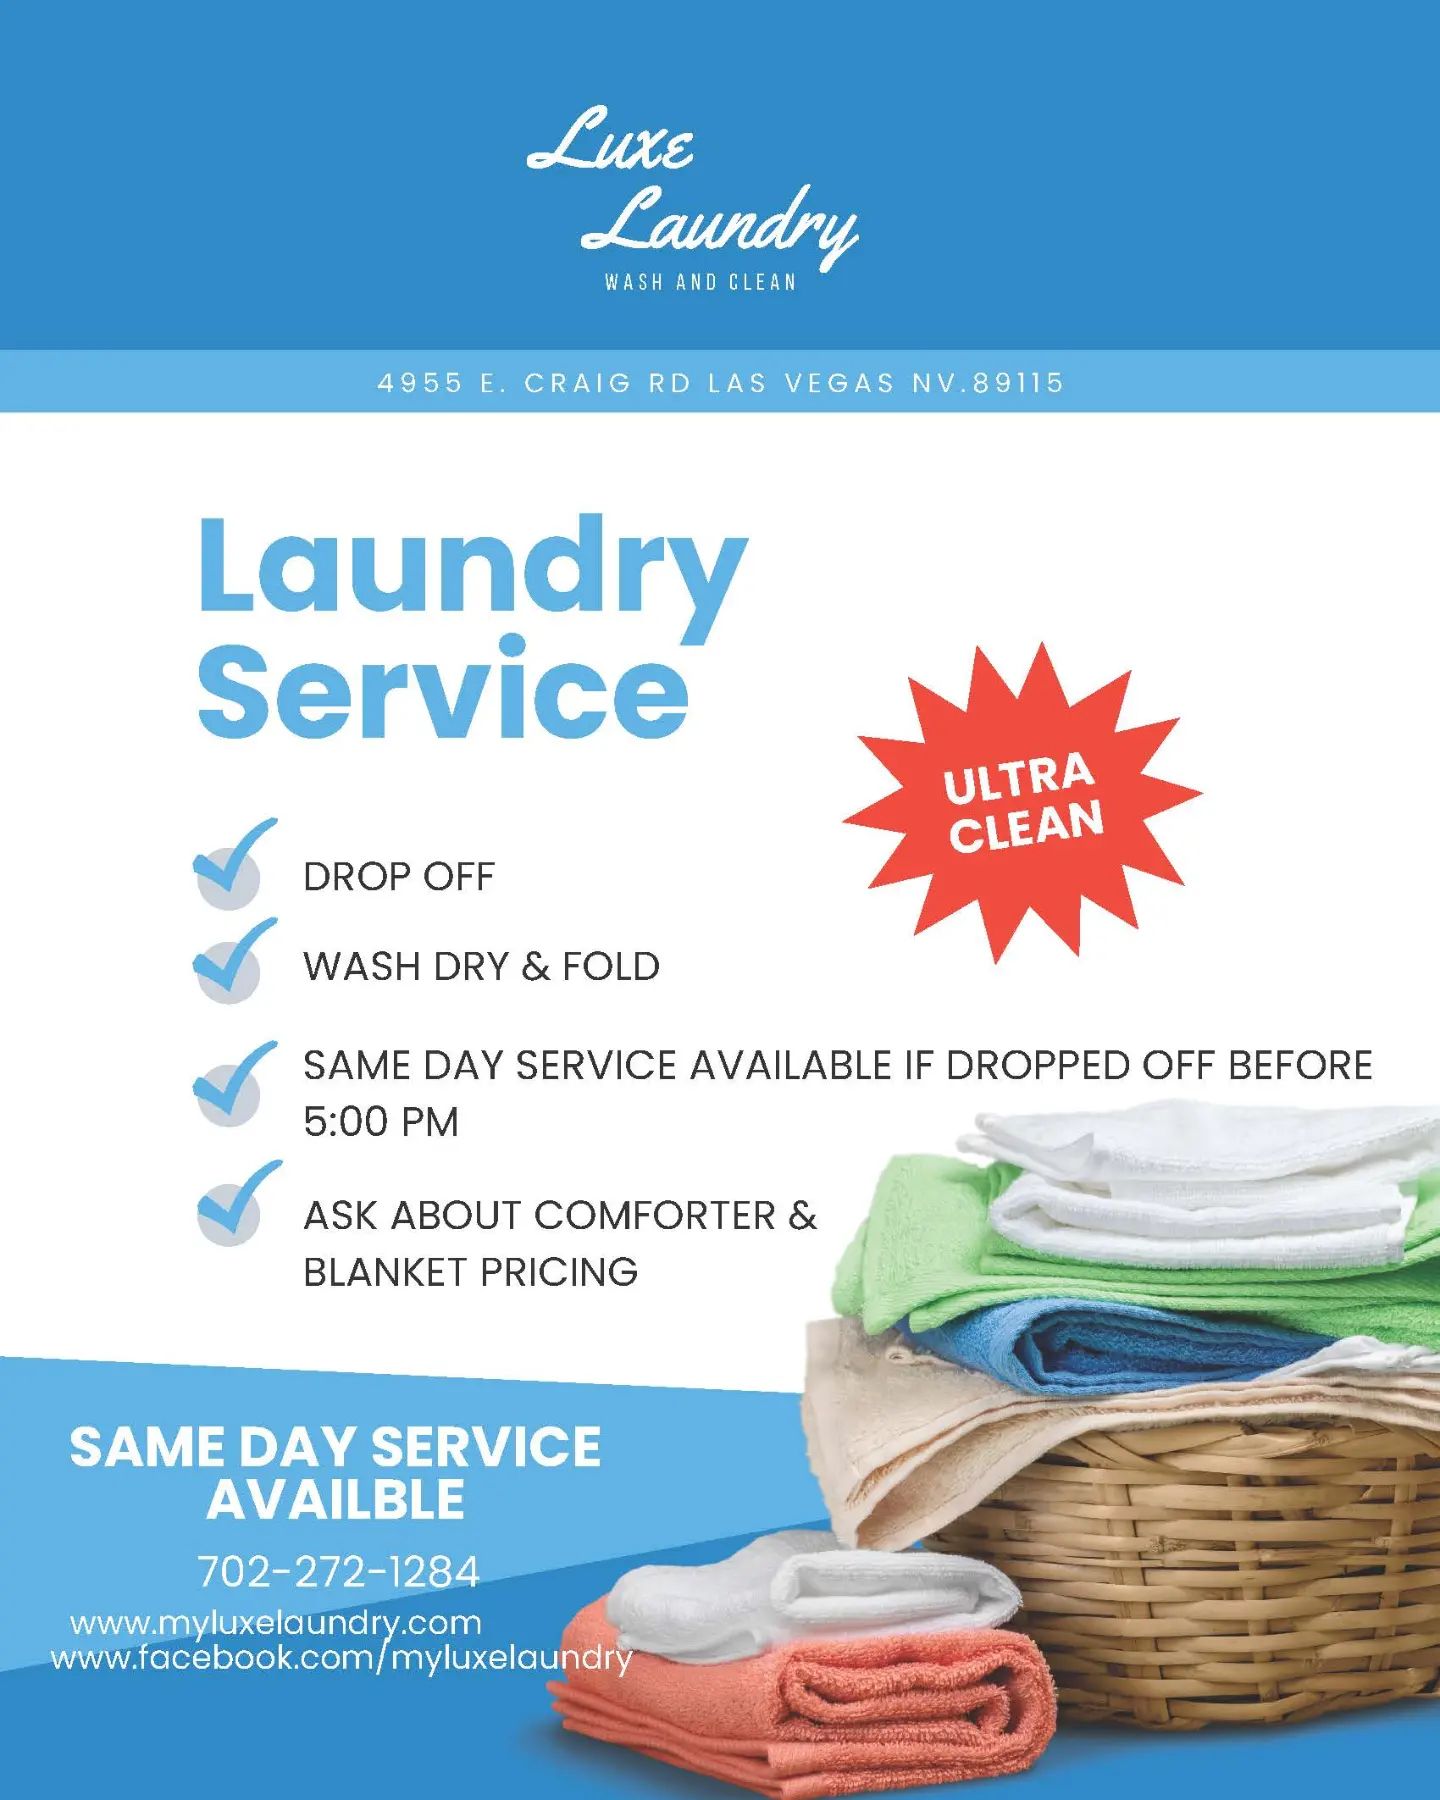 Luxe Laundry Inc & Dry Cleaning